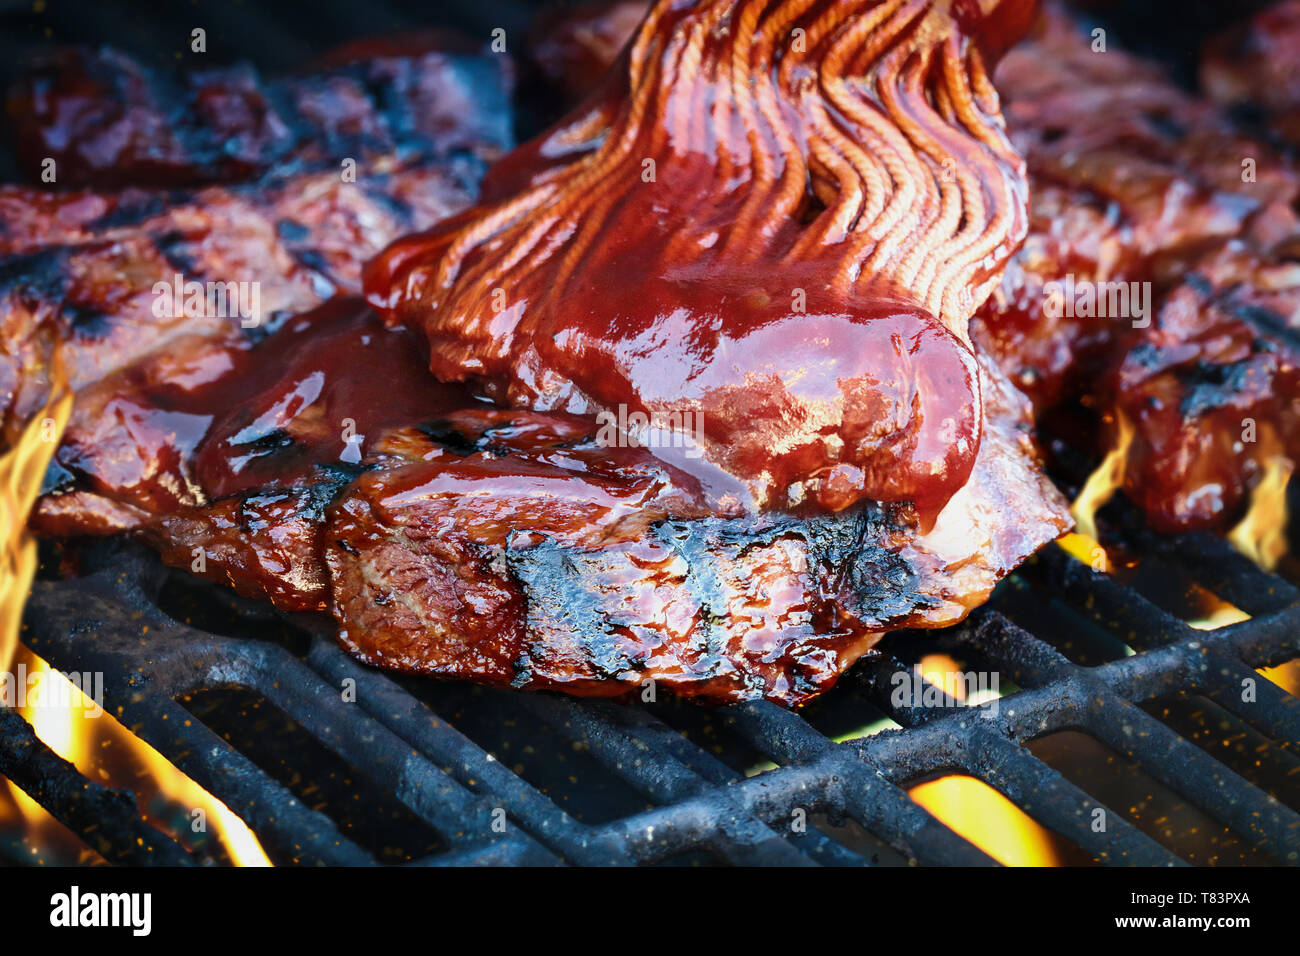 Boneless beef ribs grilling over flames with barbecue sauce added with bbq mop. Extreme shallow depth of field with blurred background with focus on f Stock Photo